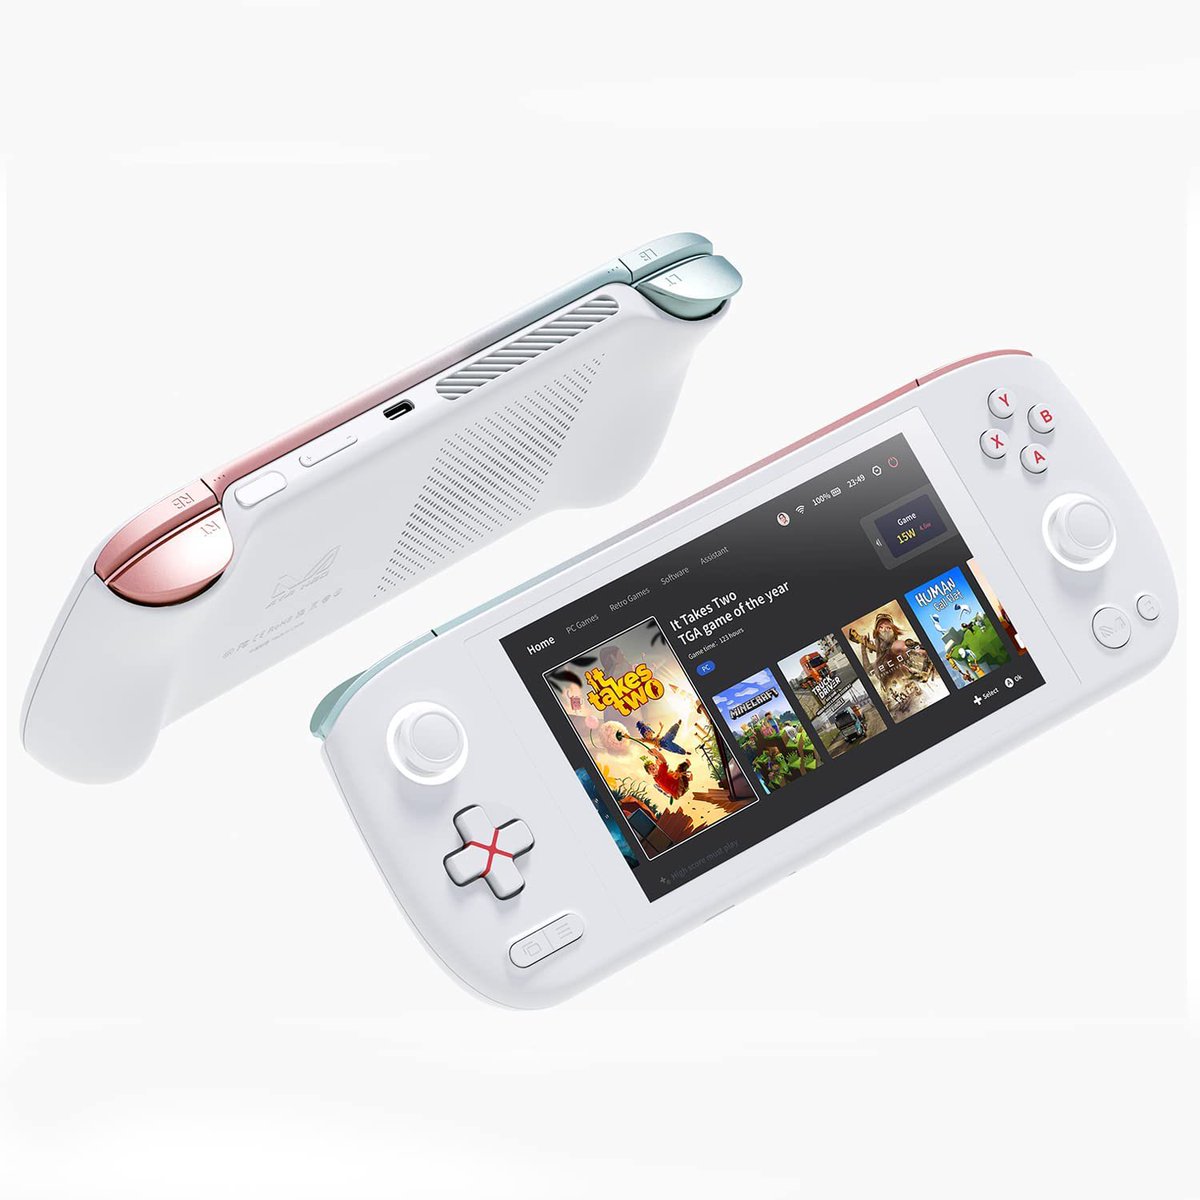 Extremely compact and sleekly designed portable for playing Steam, Windows & PlayStation PC games, and has an OLED display for the most naturally vibrant picture with true blacks. About the same size as a Nintendo Switch Lite. https://t.co/CxtIKriK2R https://t.co/71LmwXETQi